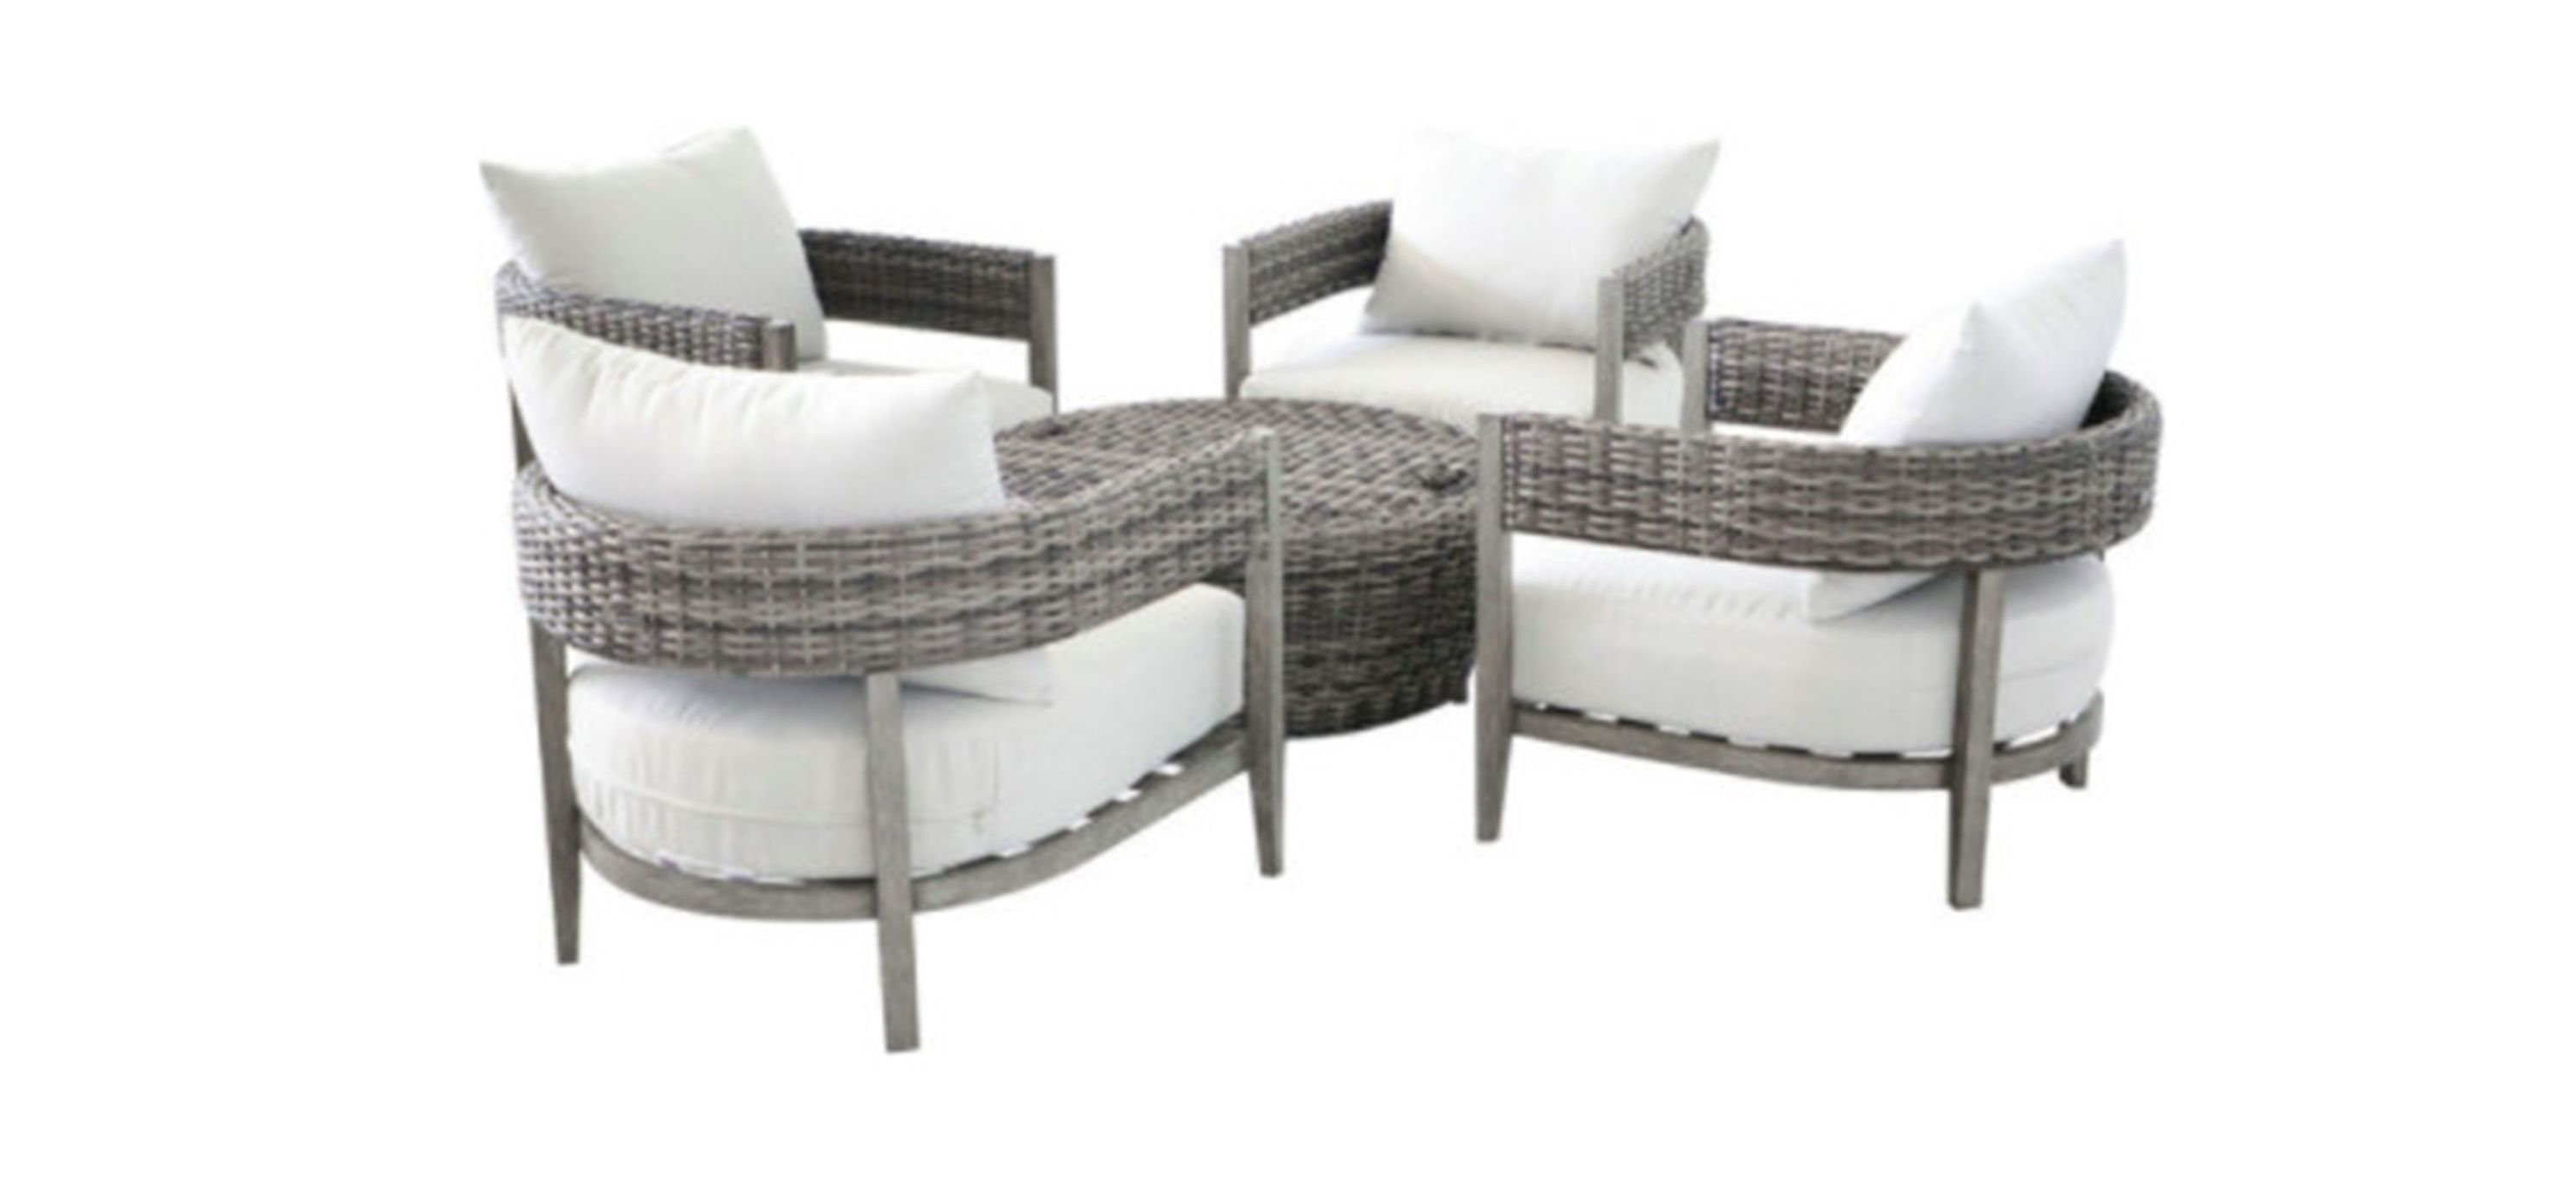 Marana 5-pc Outdoor Wicker Seating Set with Storage Coffee Table